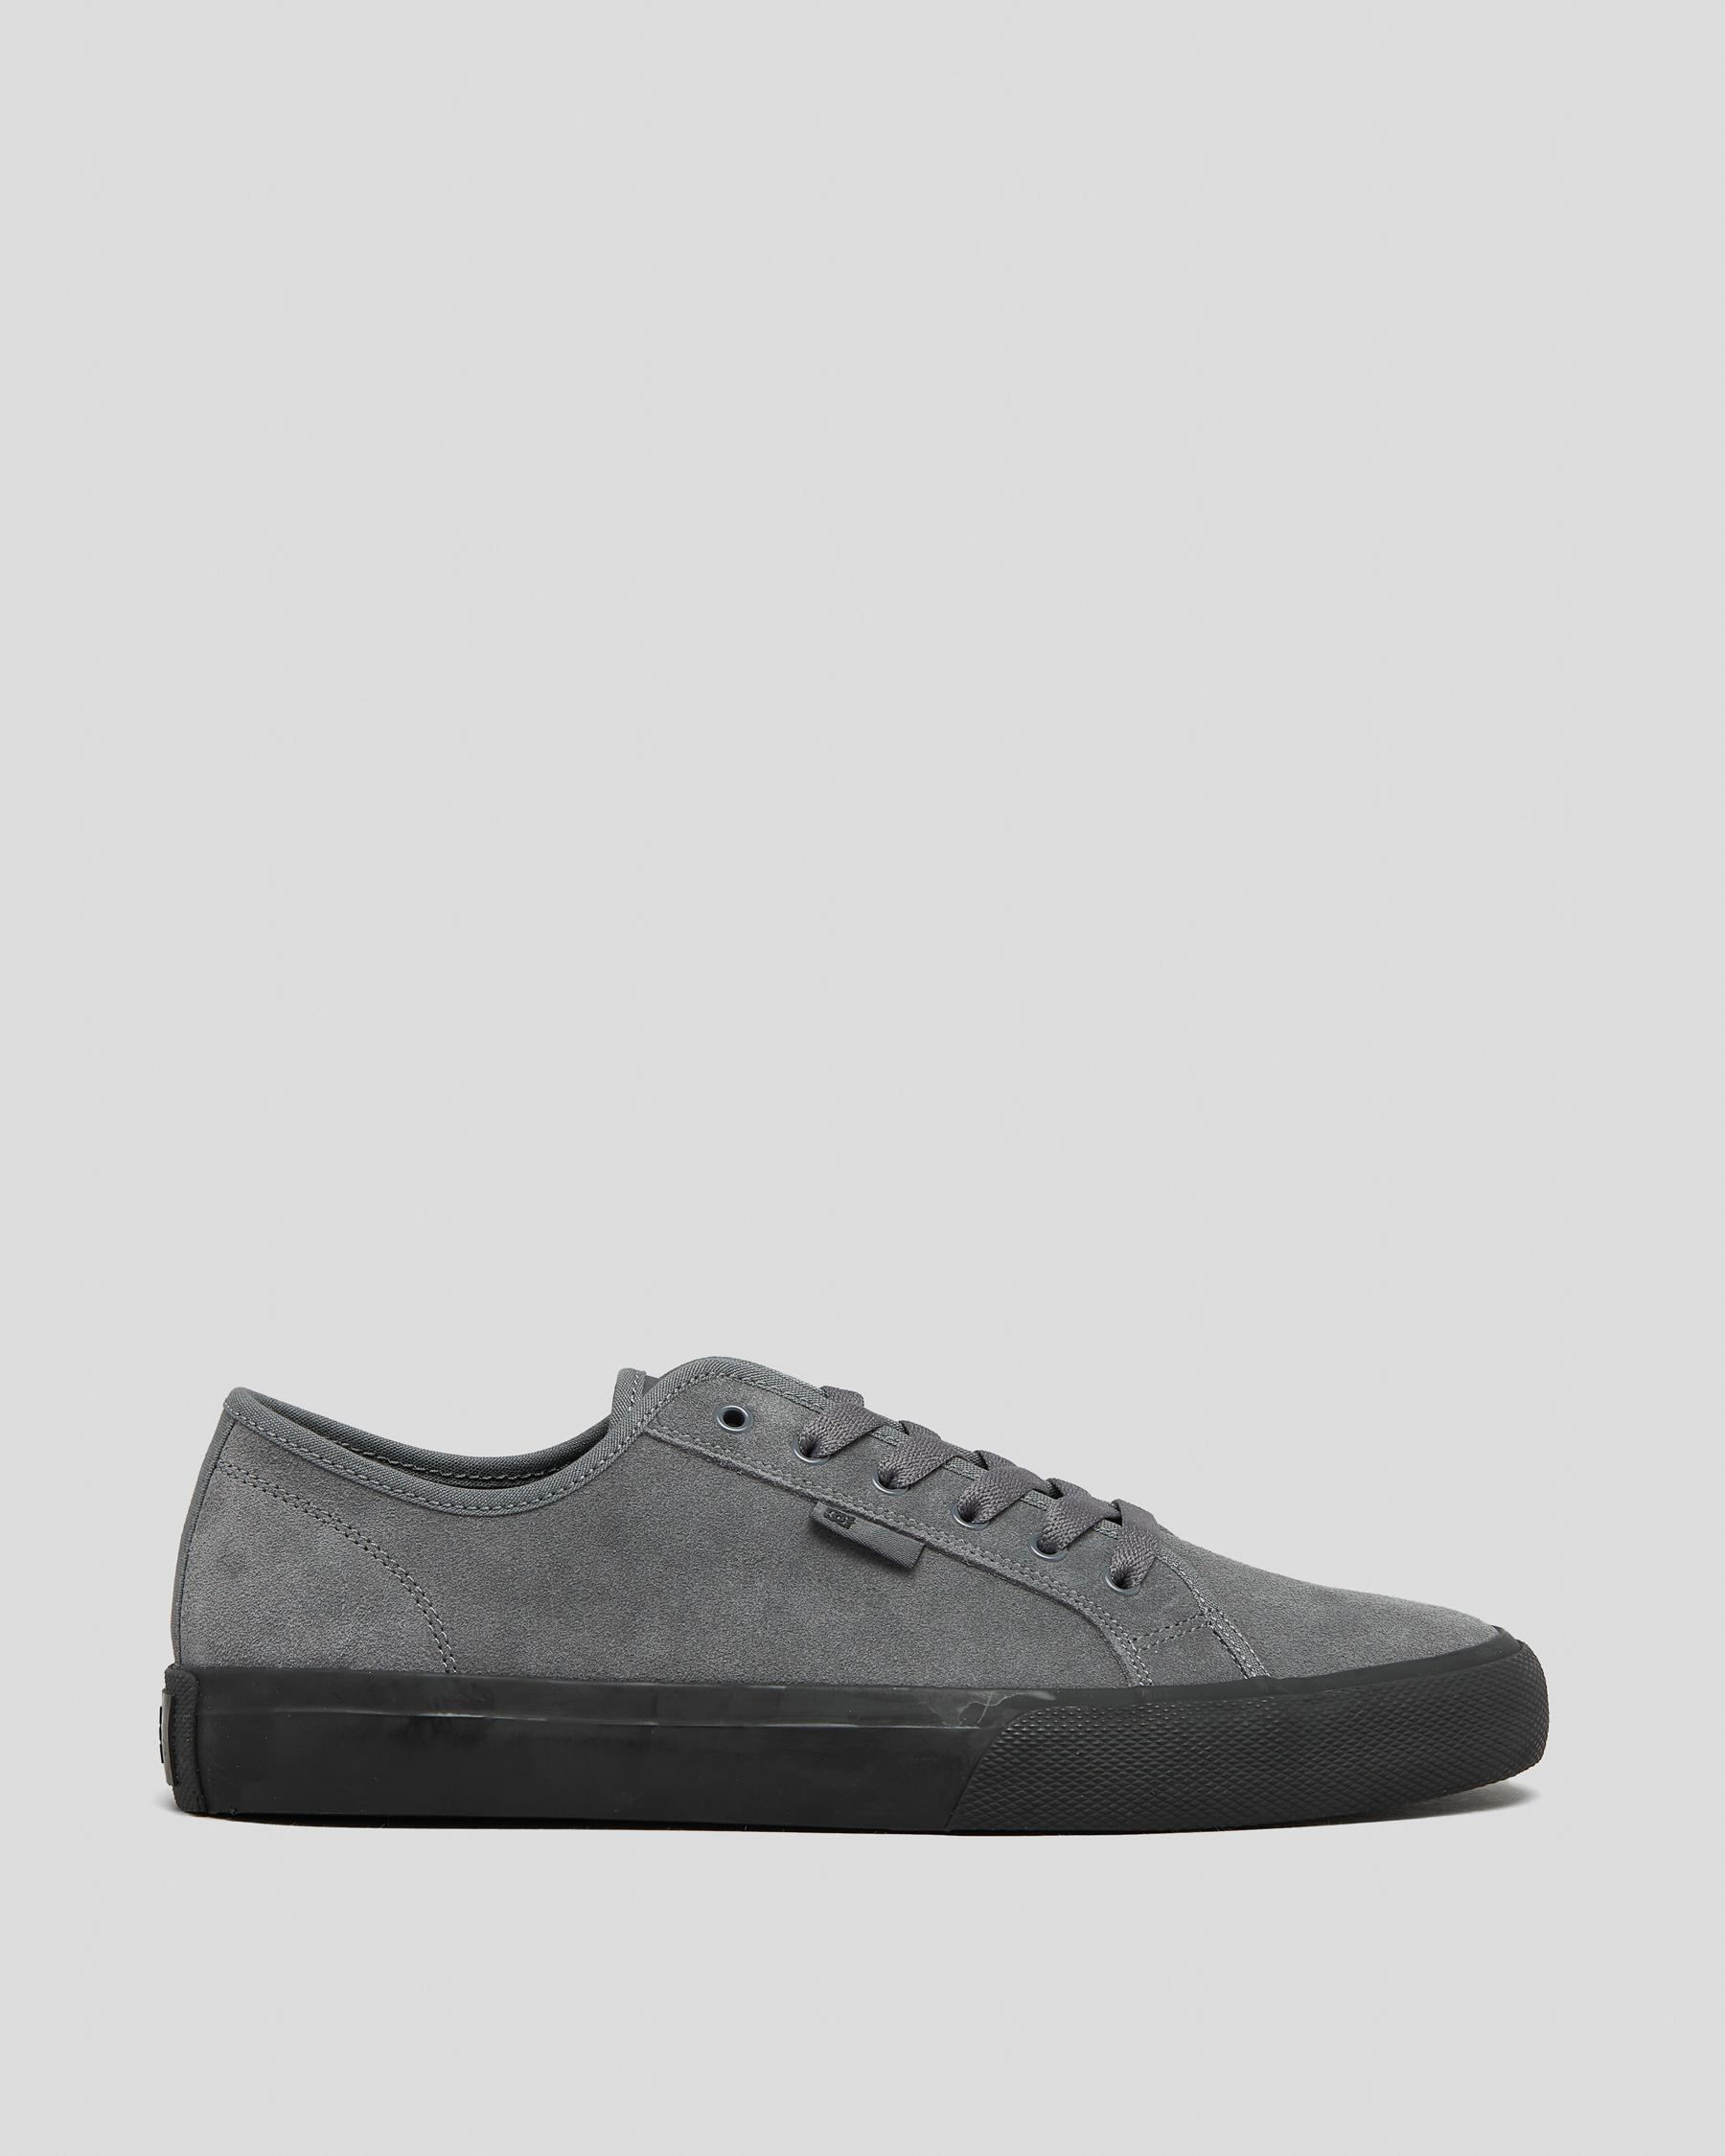 Shop DC Shoes Manual Shoes In Grey/black - Fast Shipping & Easy Returns ...